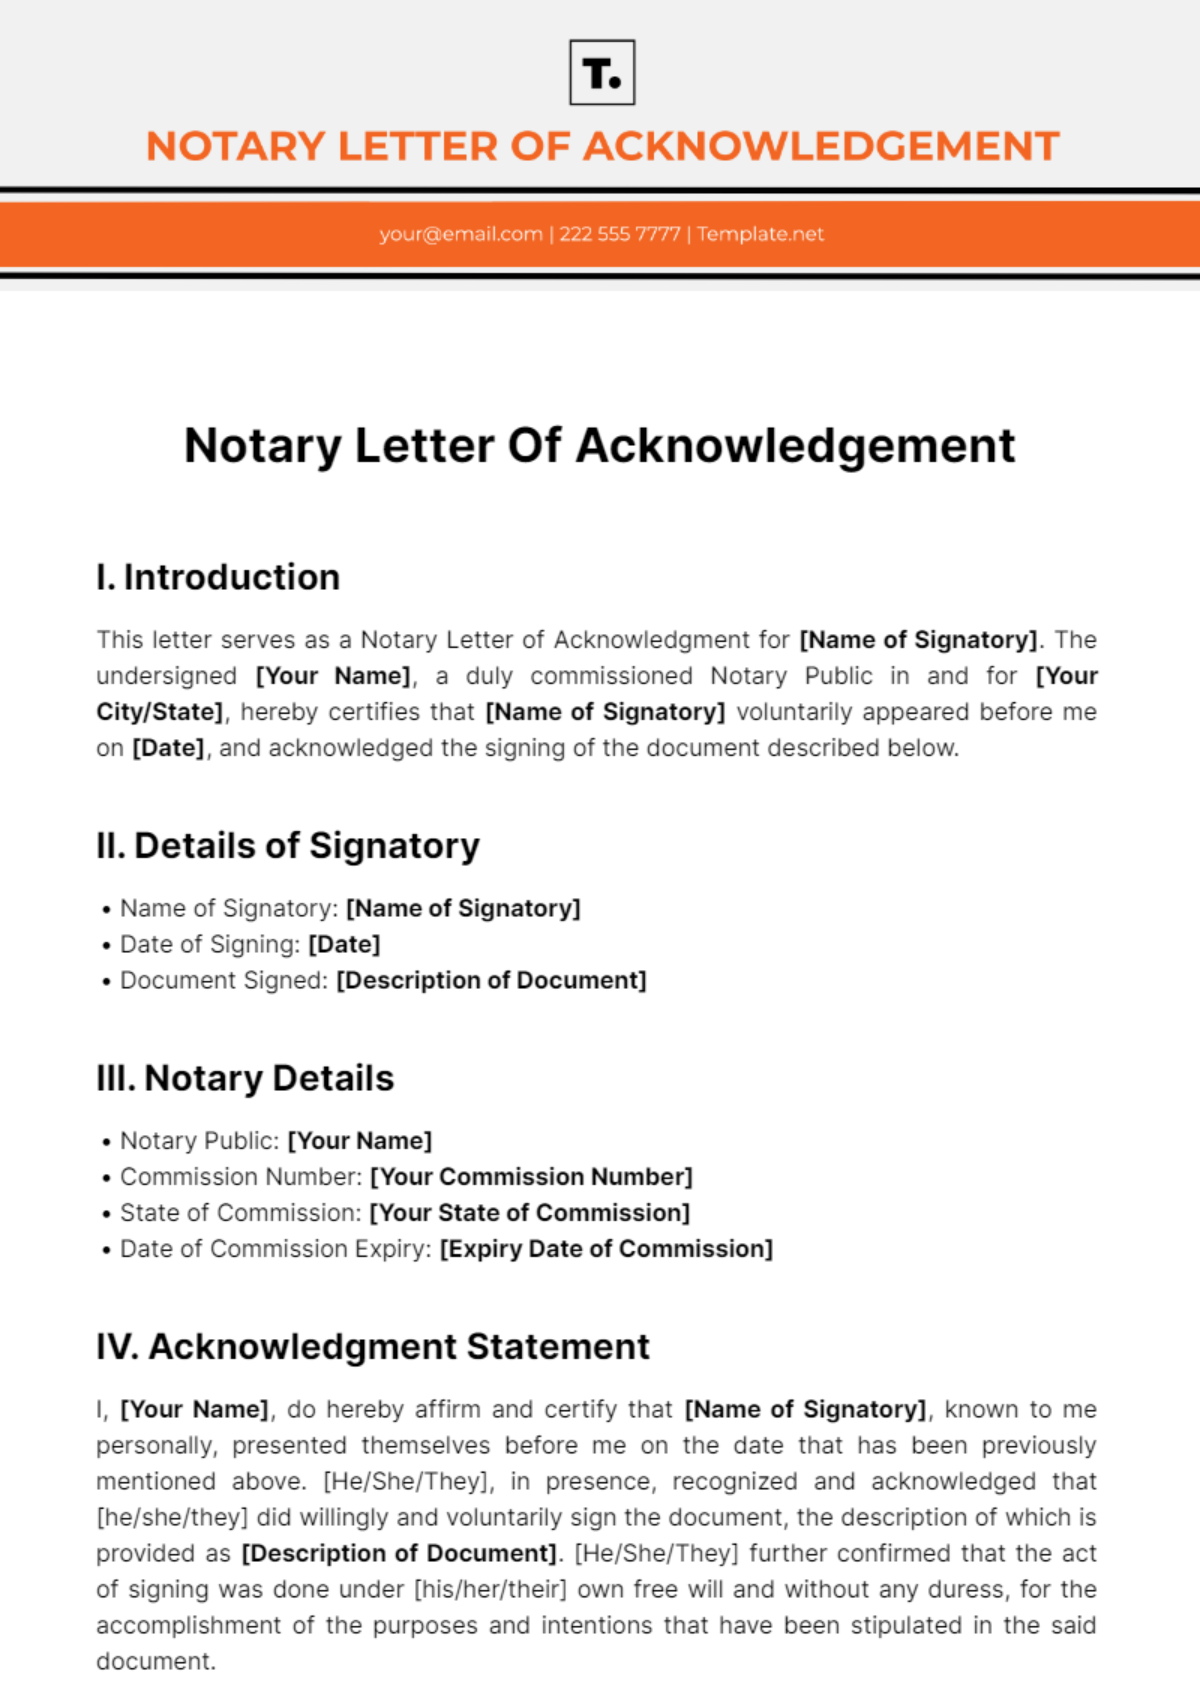 Notary Letter Of Acknowledgement Template